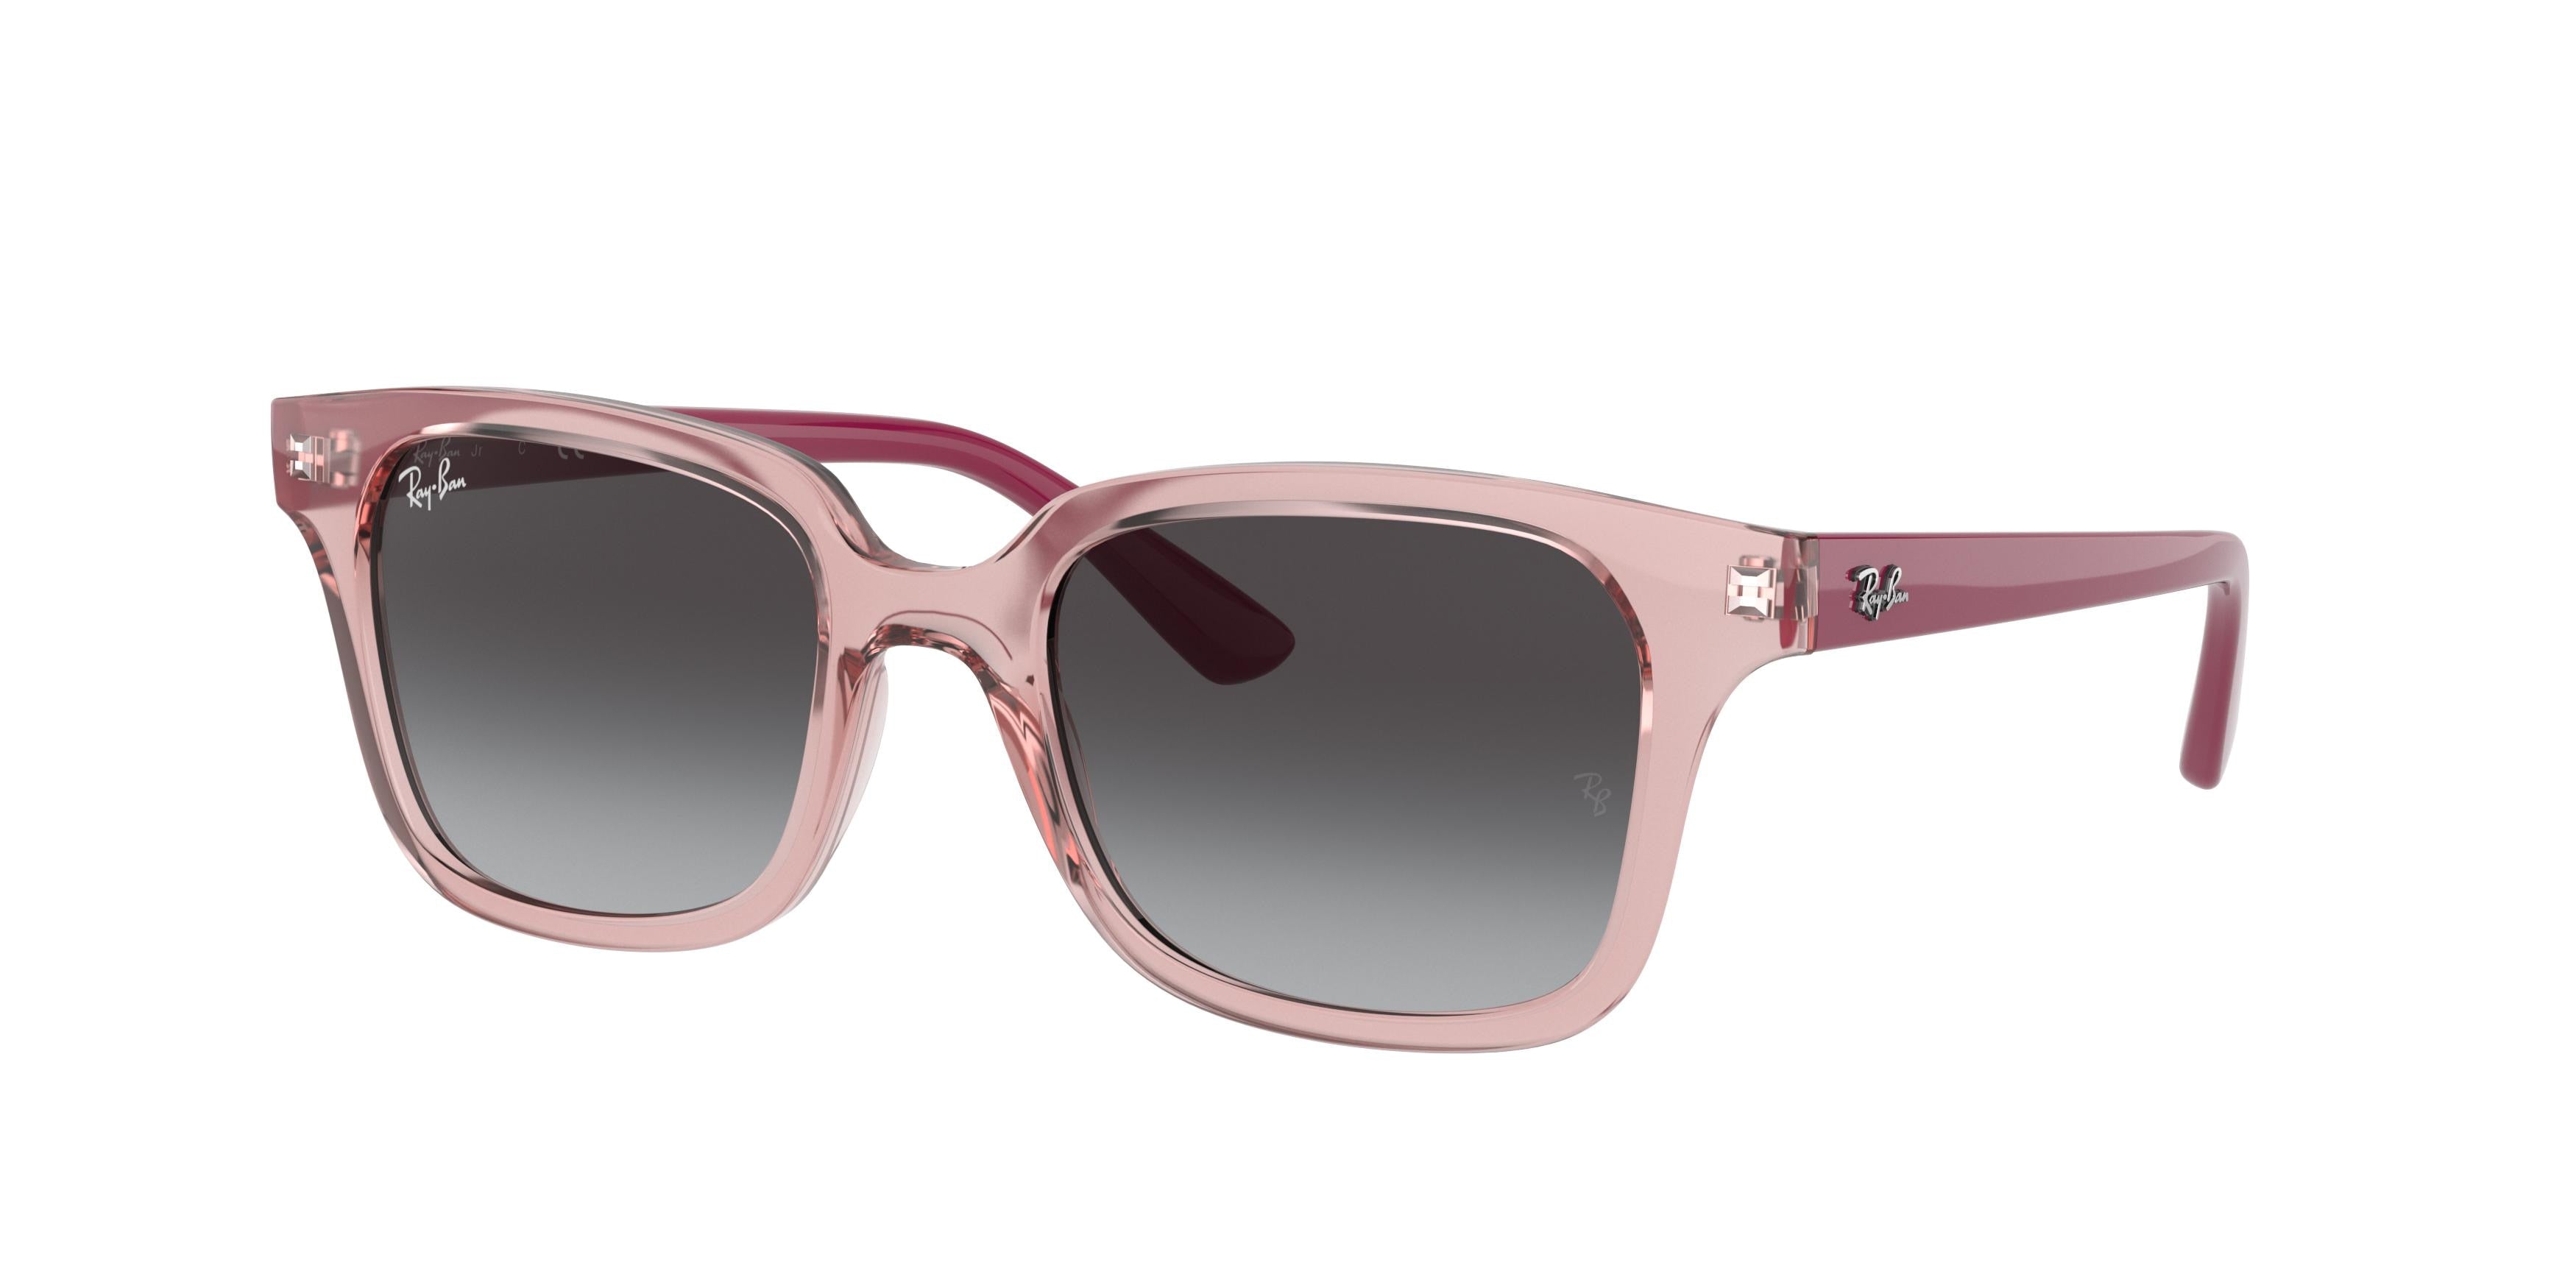 Ray-Ban Junior RJ9071S Square Sunglasses  70678G-Transparent Pink 48-130-18 - Color Map Pink